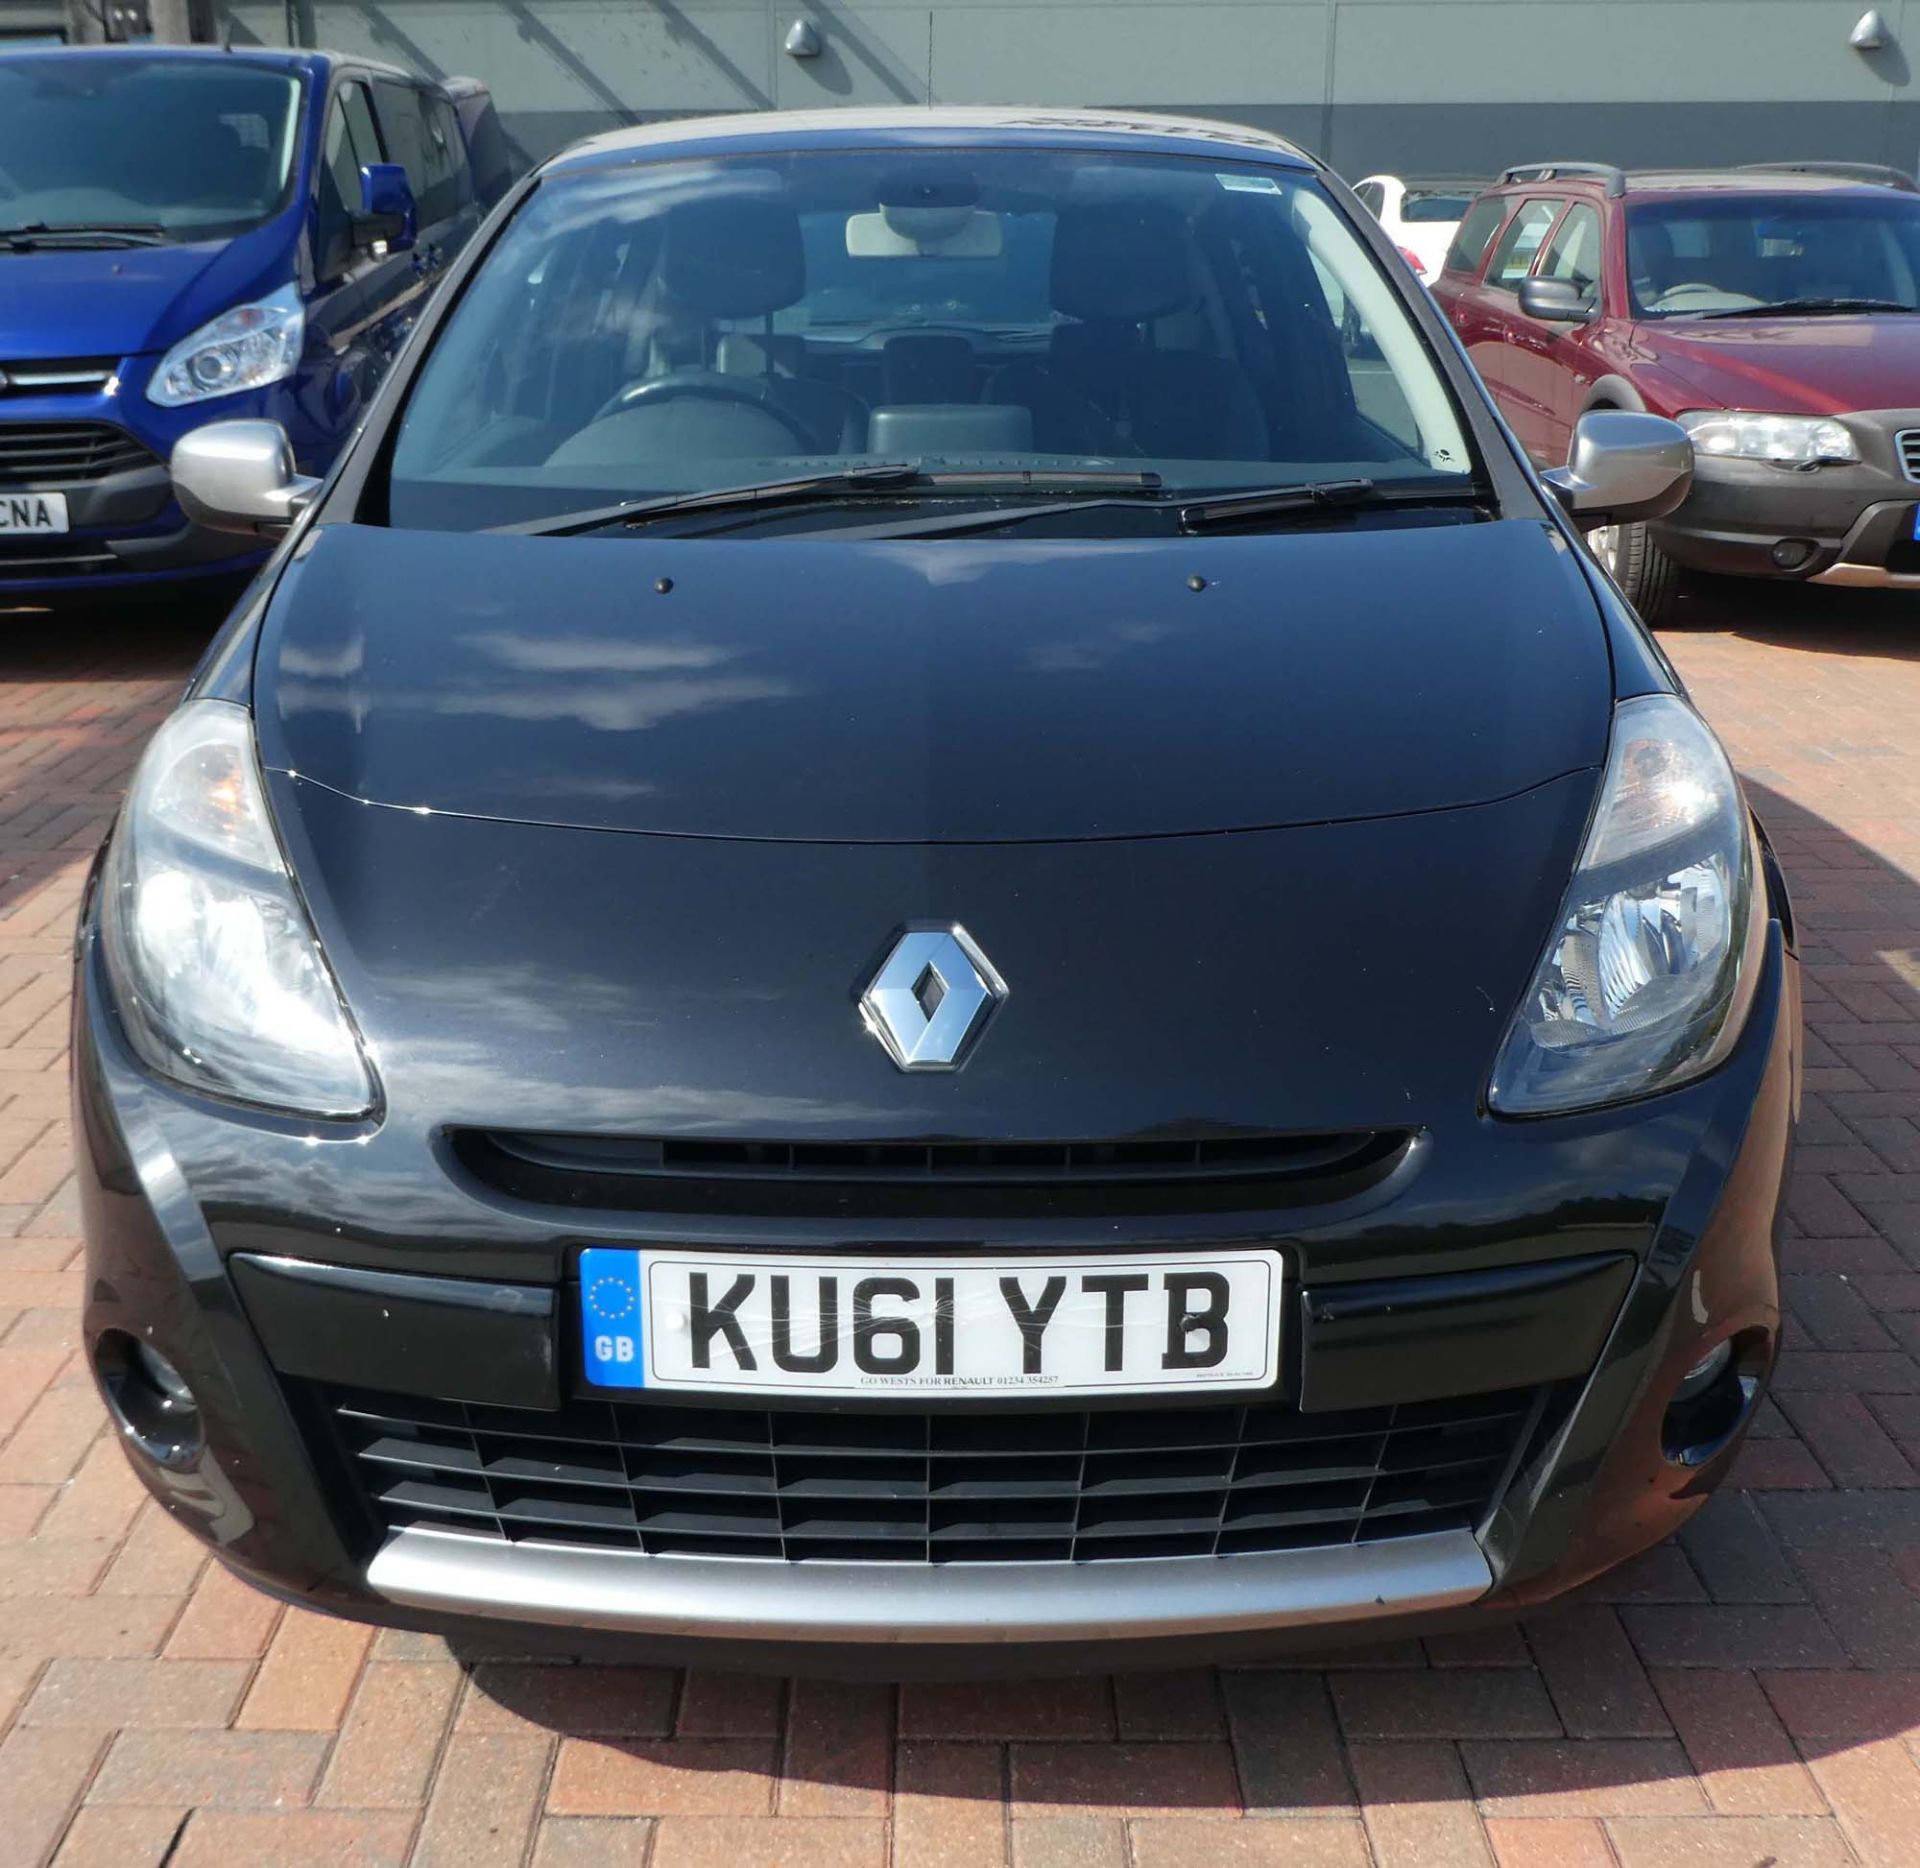 KU61 YTB Renault Clio Dynamique Tomtom 16v in black, first registered 26.09.2011, one key, 1149cc, - Image 11 of 12